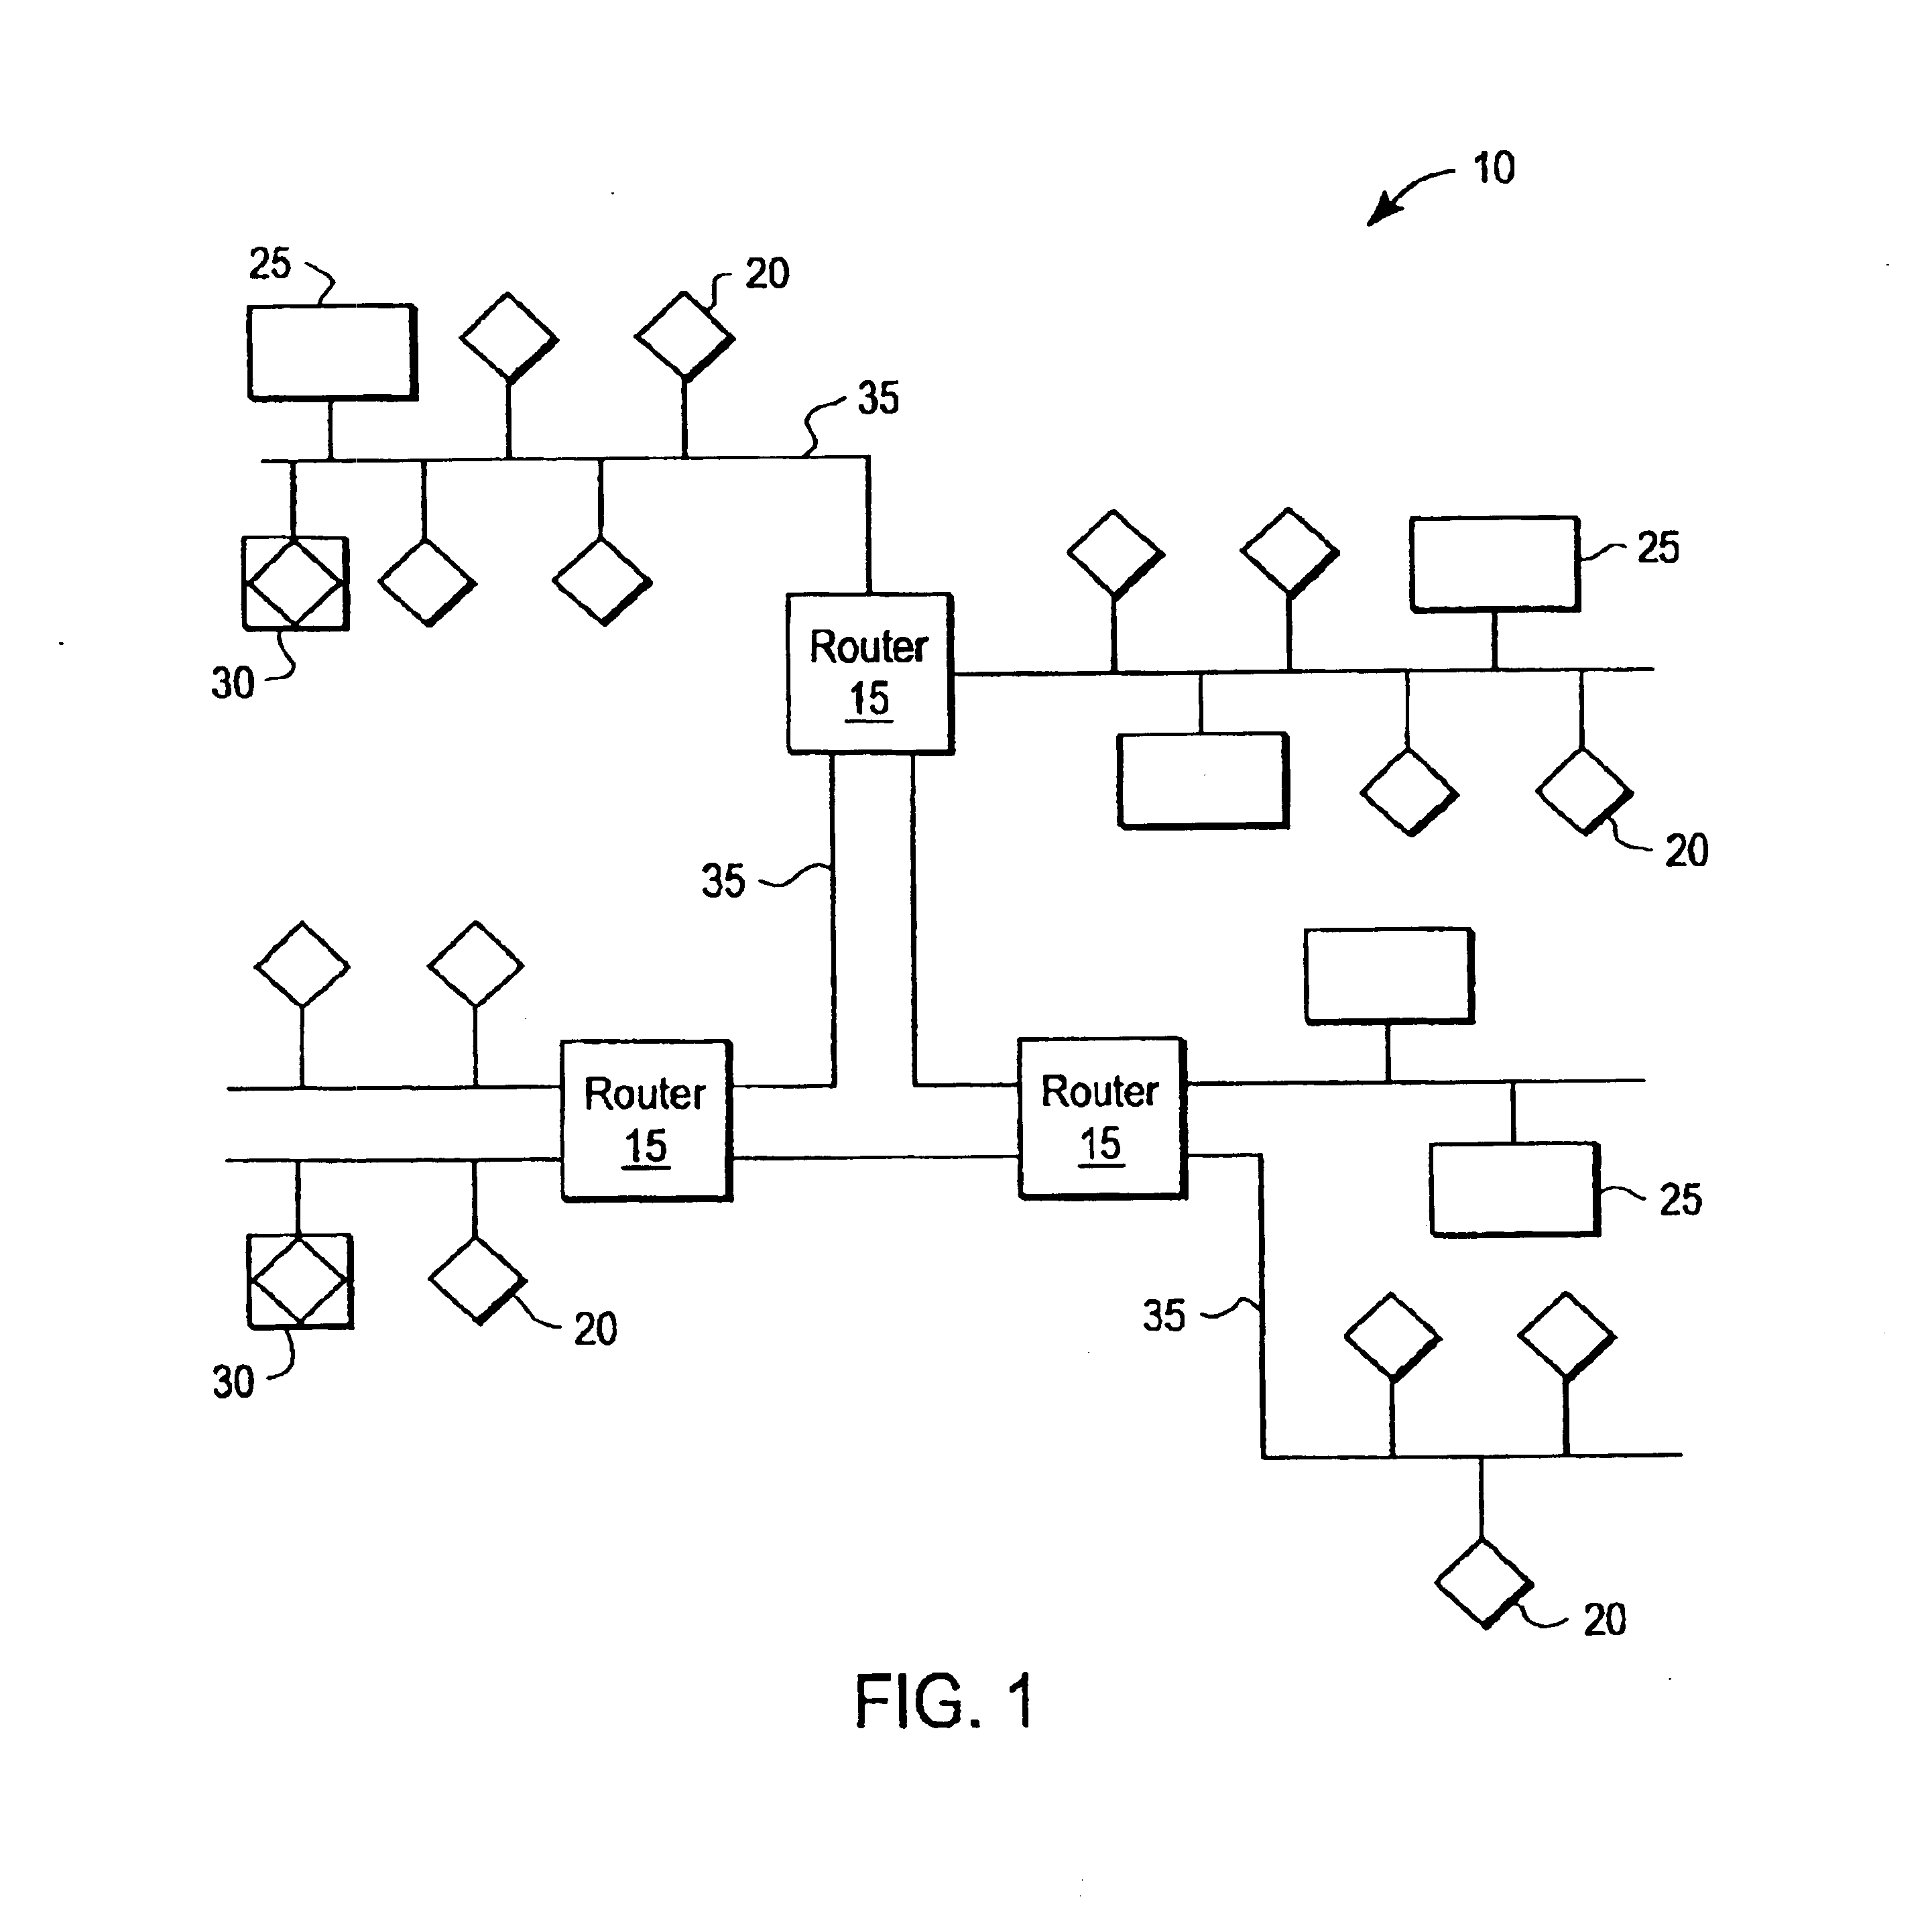 System and methods for highly distributed wide-area data management of a network of data sources through a database interface